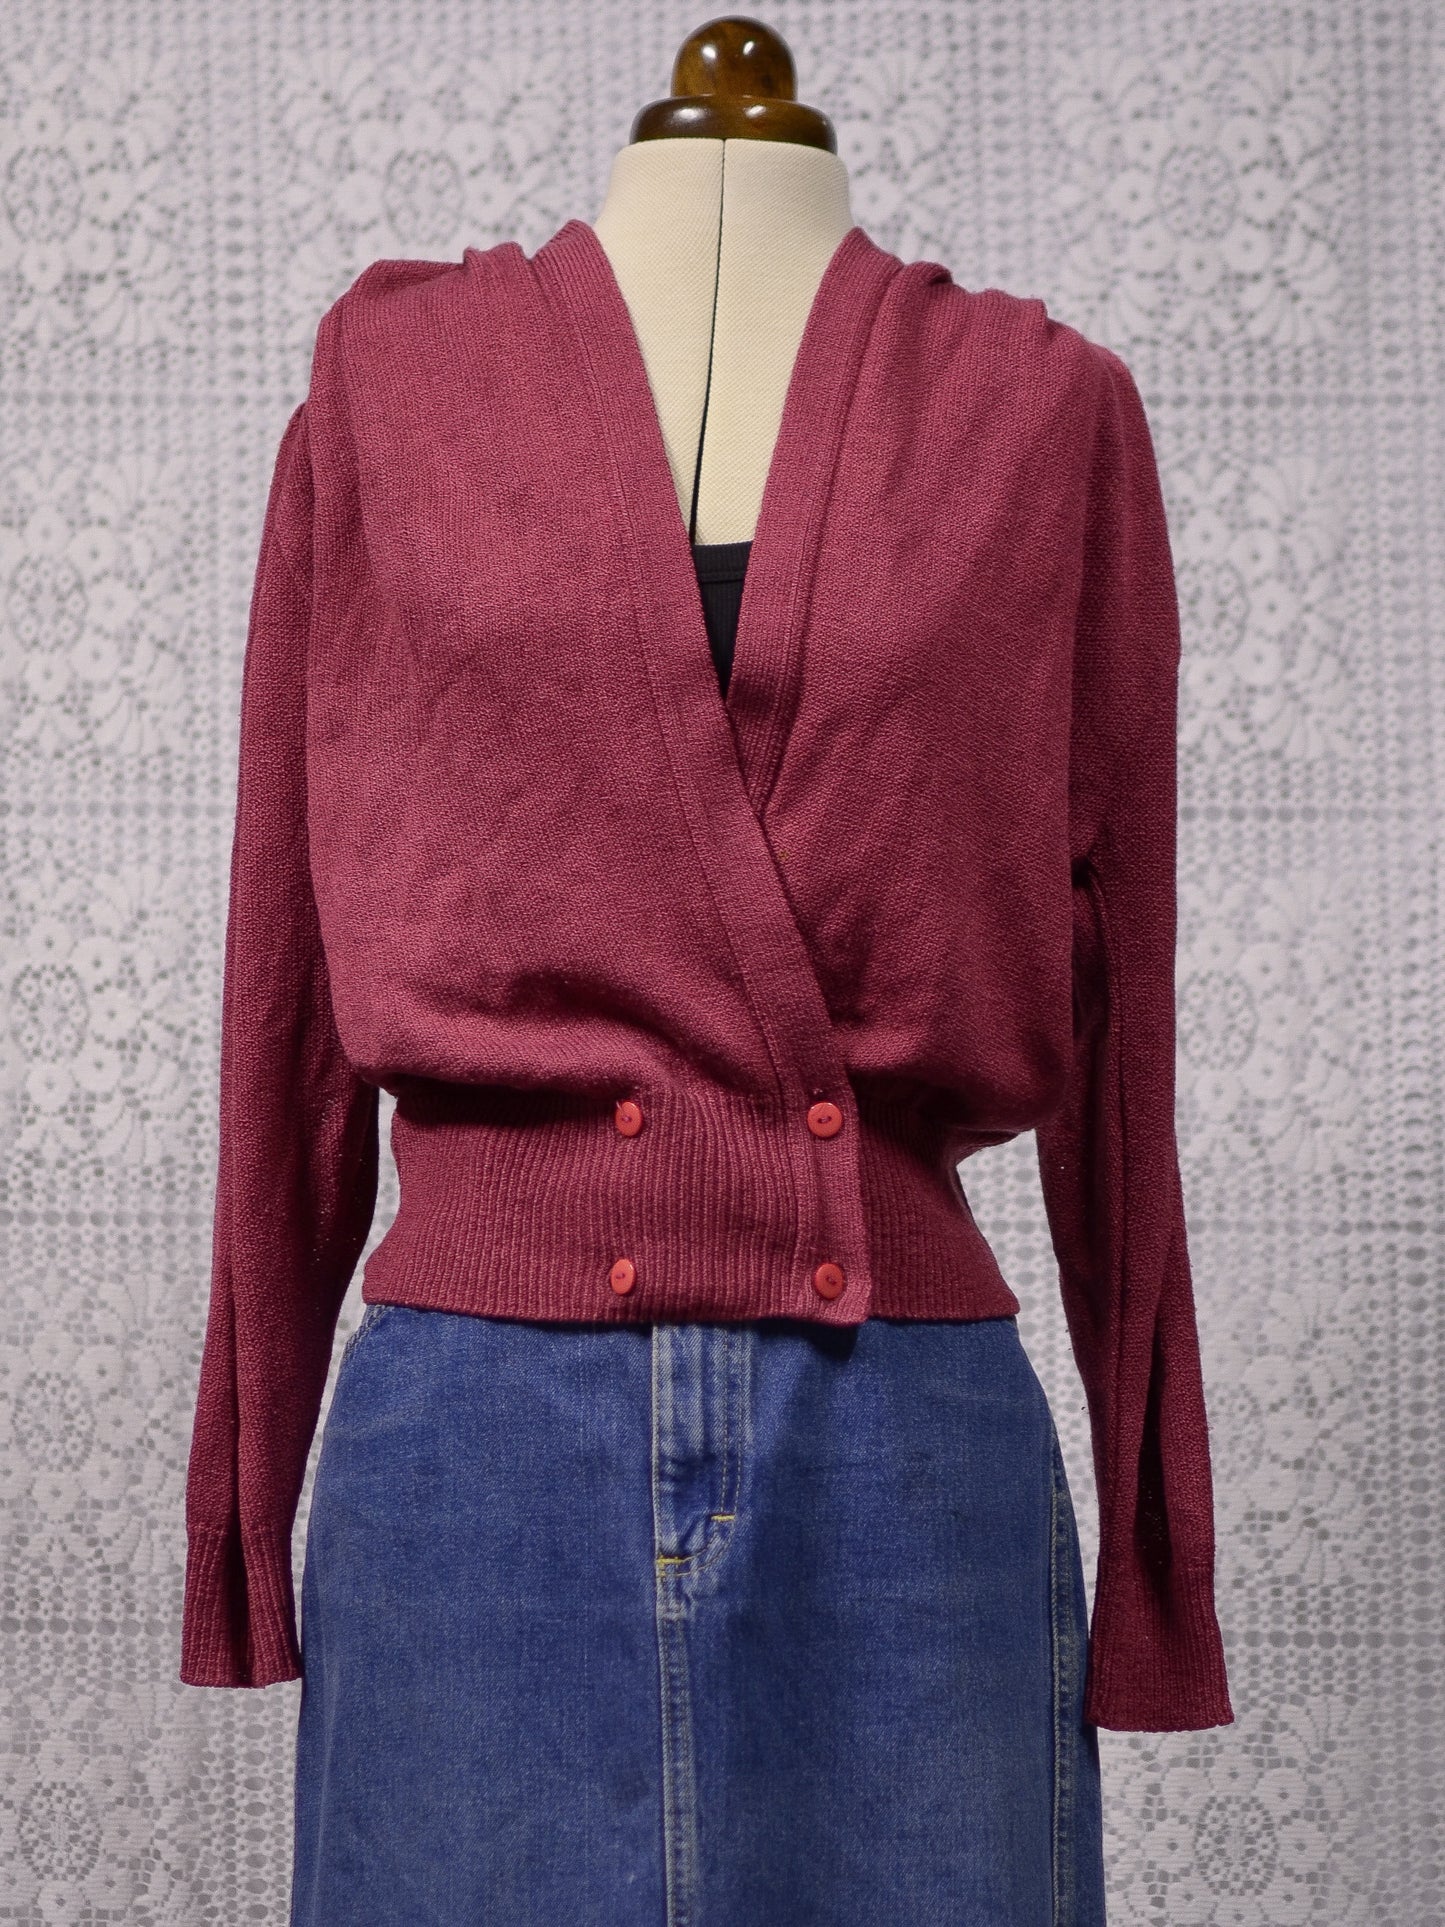 1980s dark pink double breasted cardigan